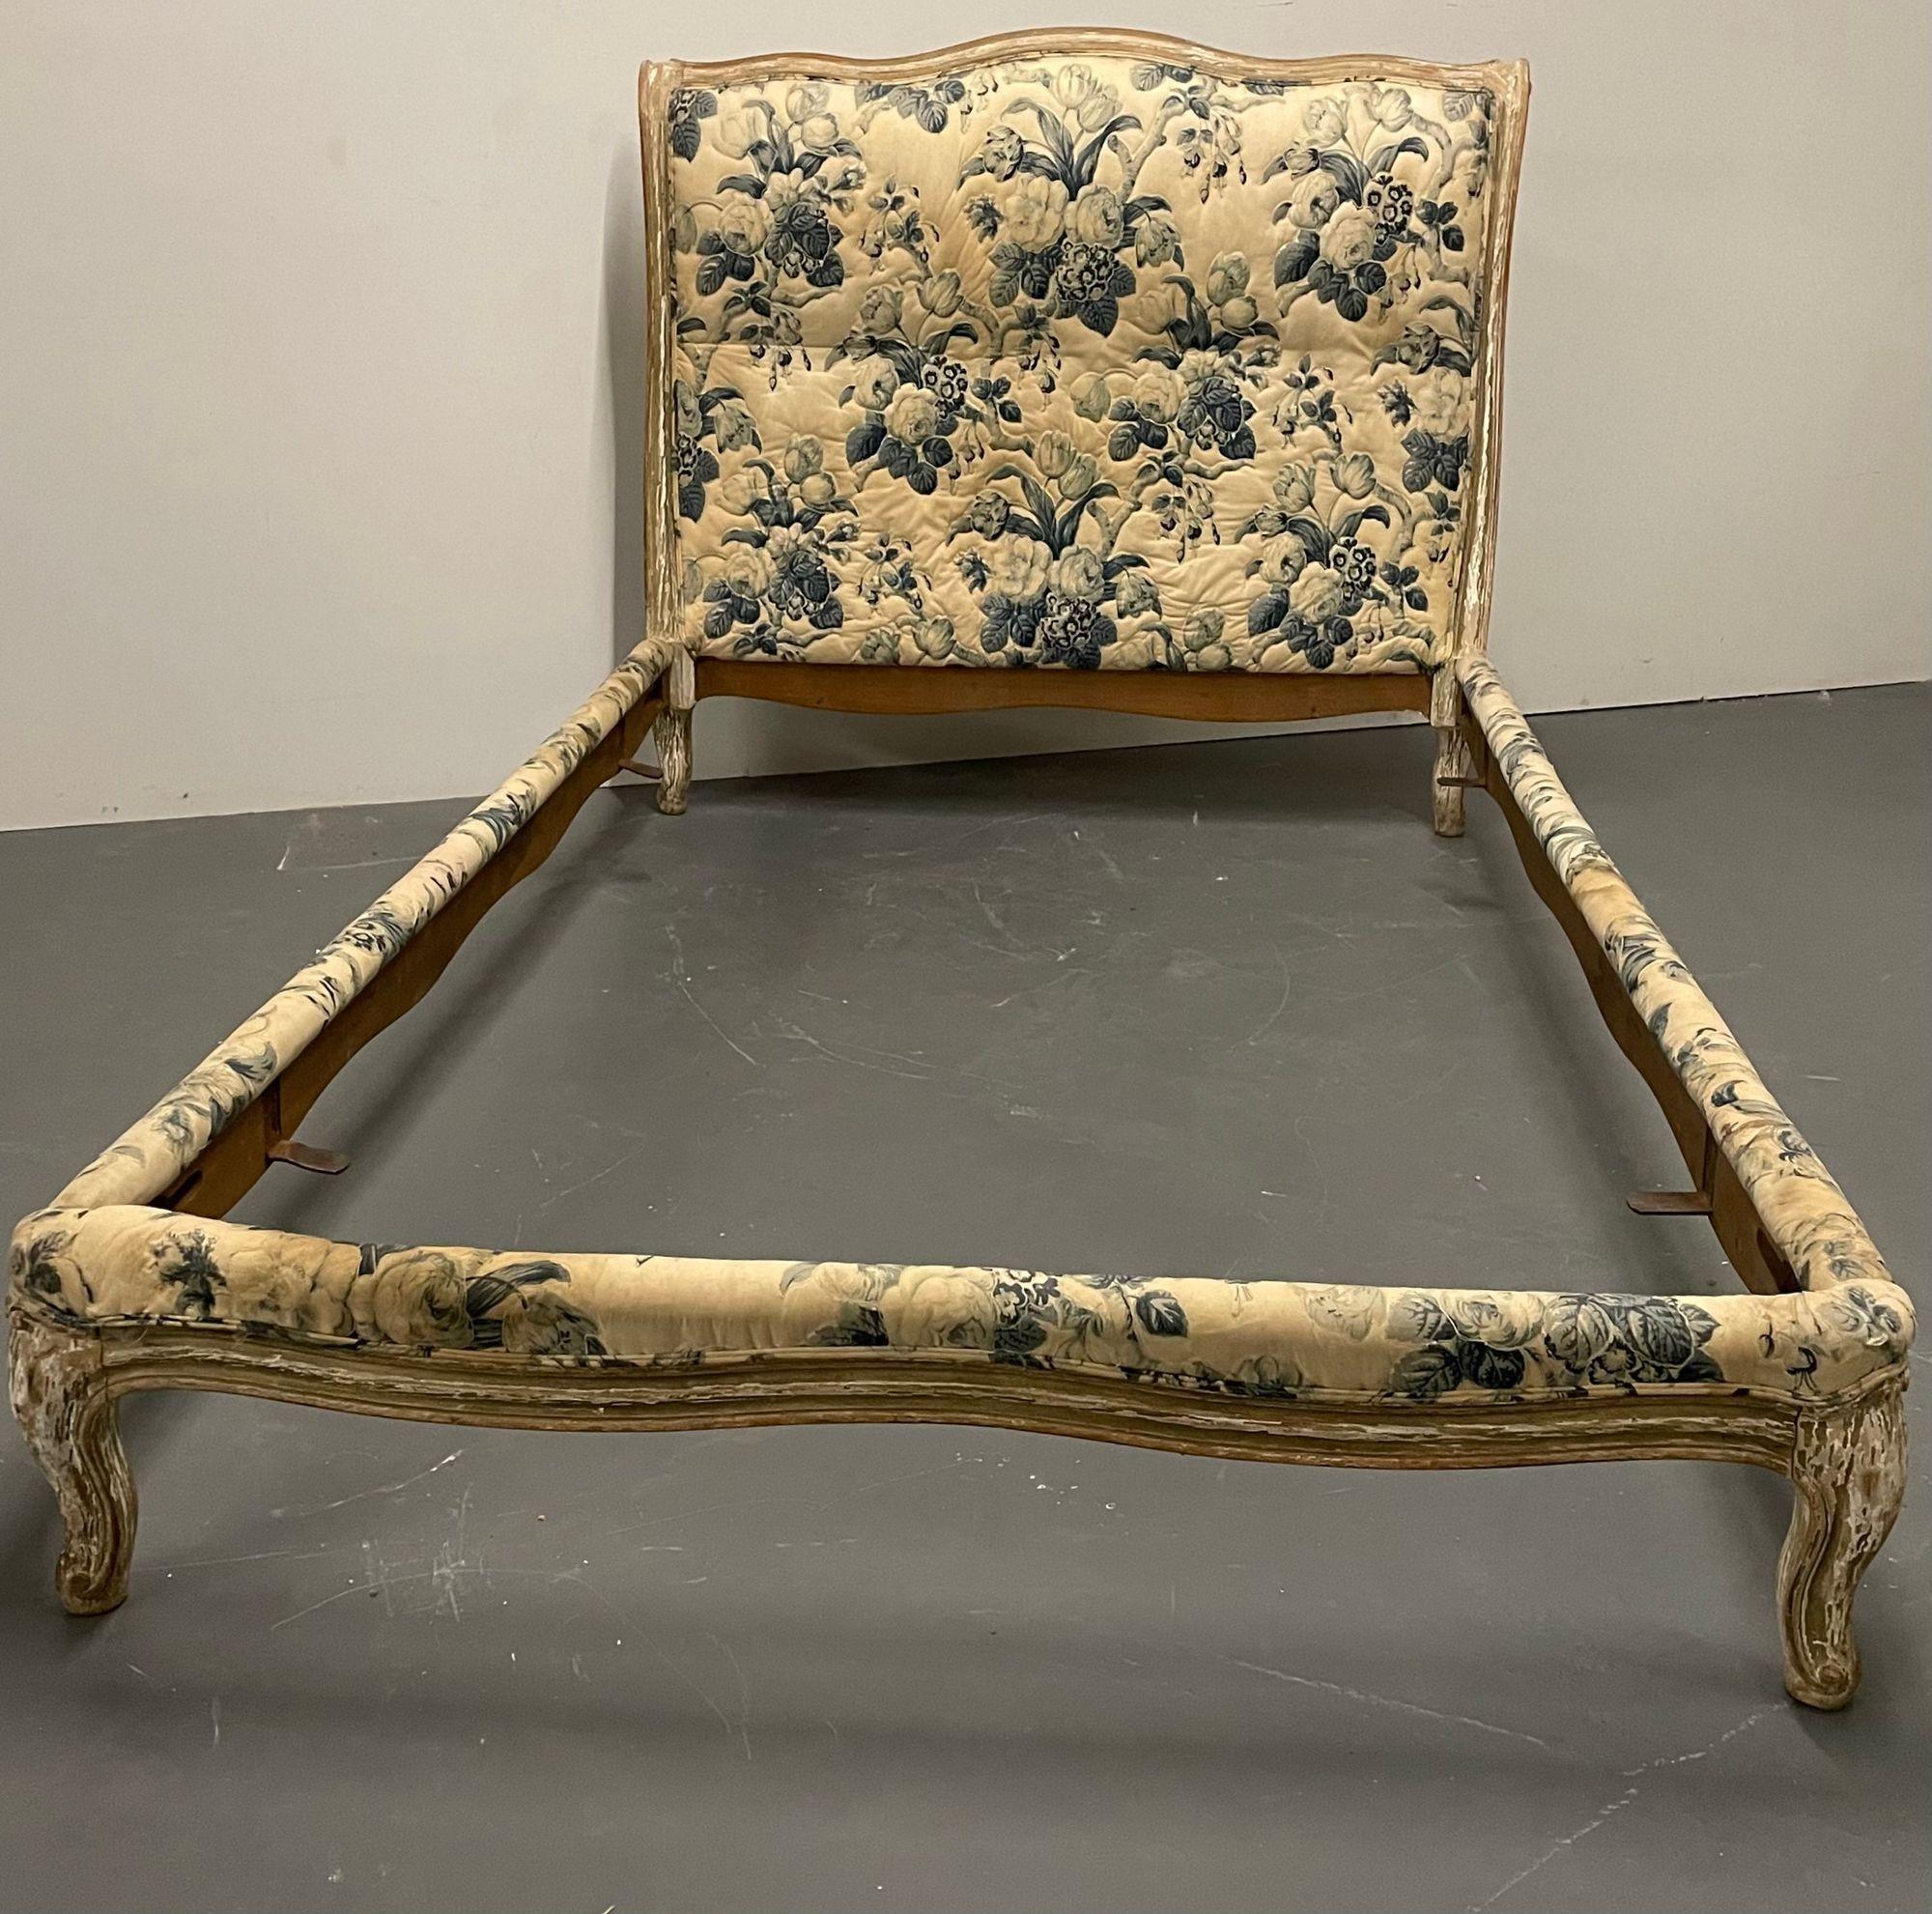 Maison Jansen Paint Decorated Twin Bedframe, Distressed, Stamped Made in France
 
A finely detailed sleigh bed having original paint finish on a Louis XV Frame by this highly sought after designer. The whole in a worn and tattered painted finish in